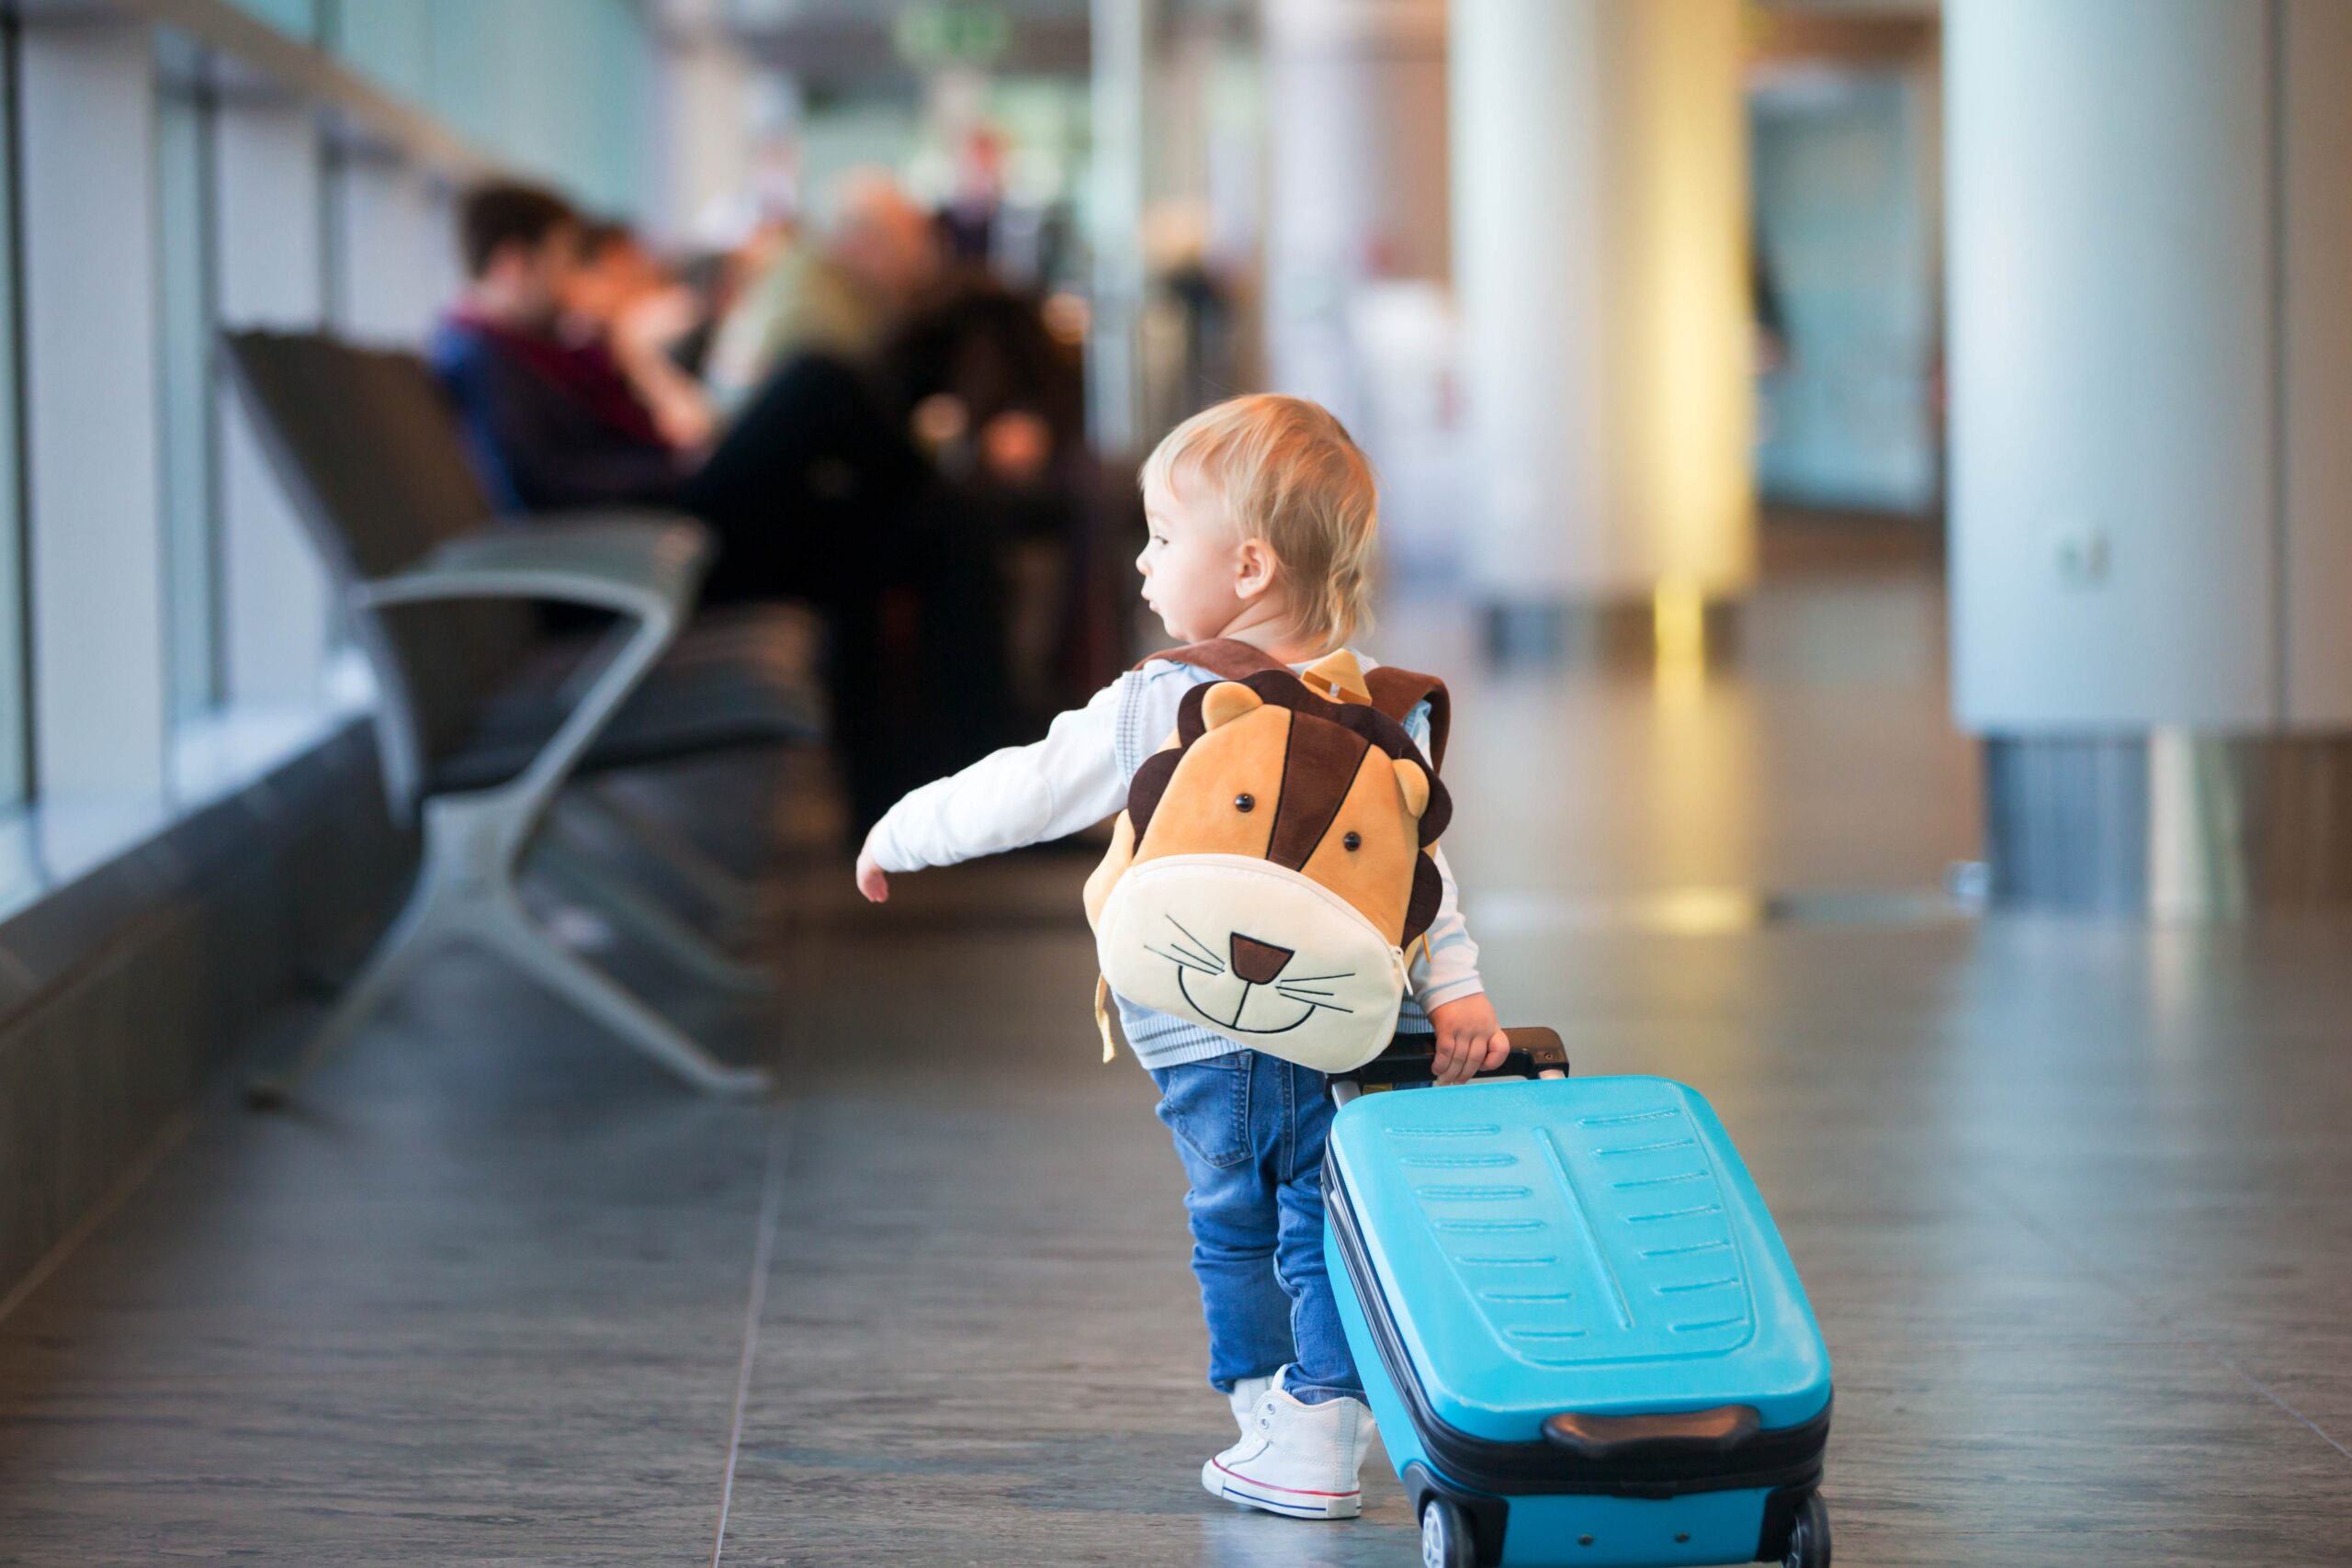 B2B column: Can I travel without the other parent’s consent?